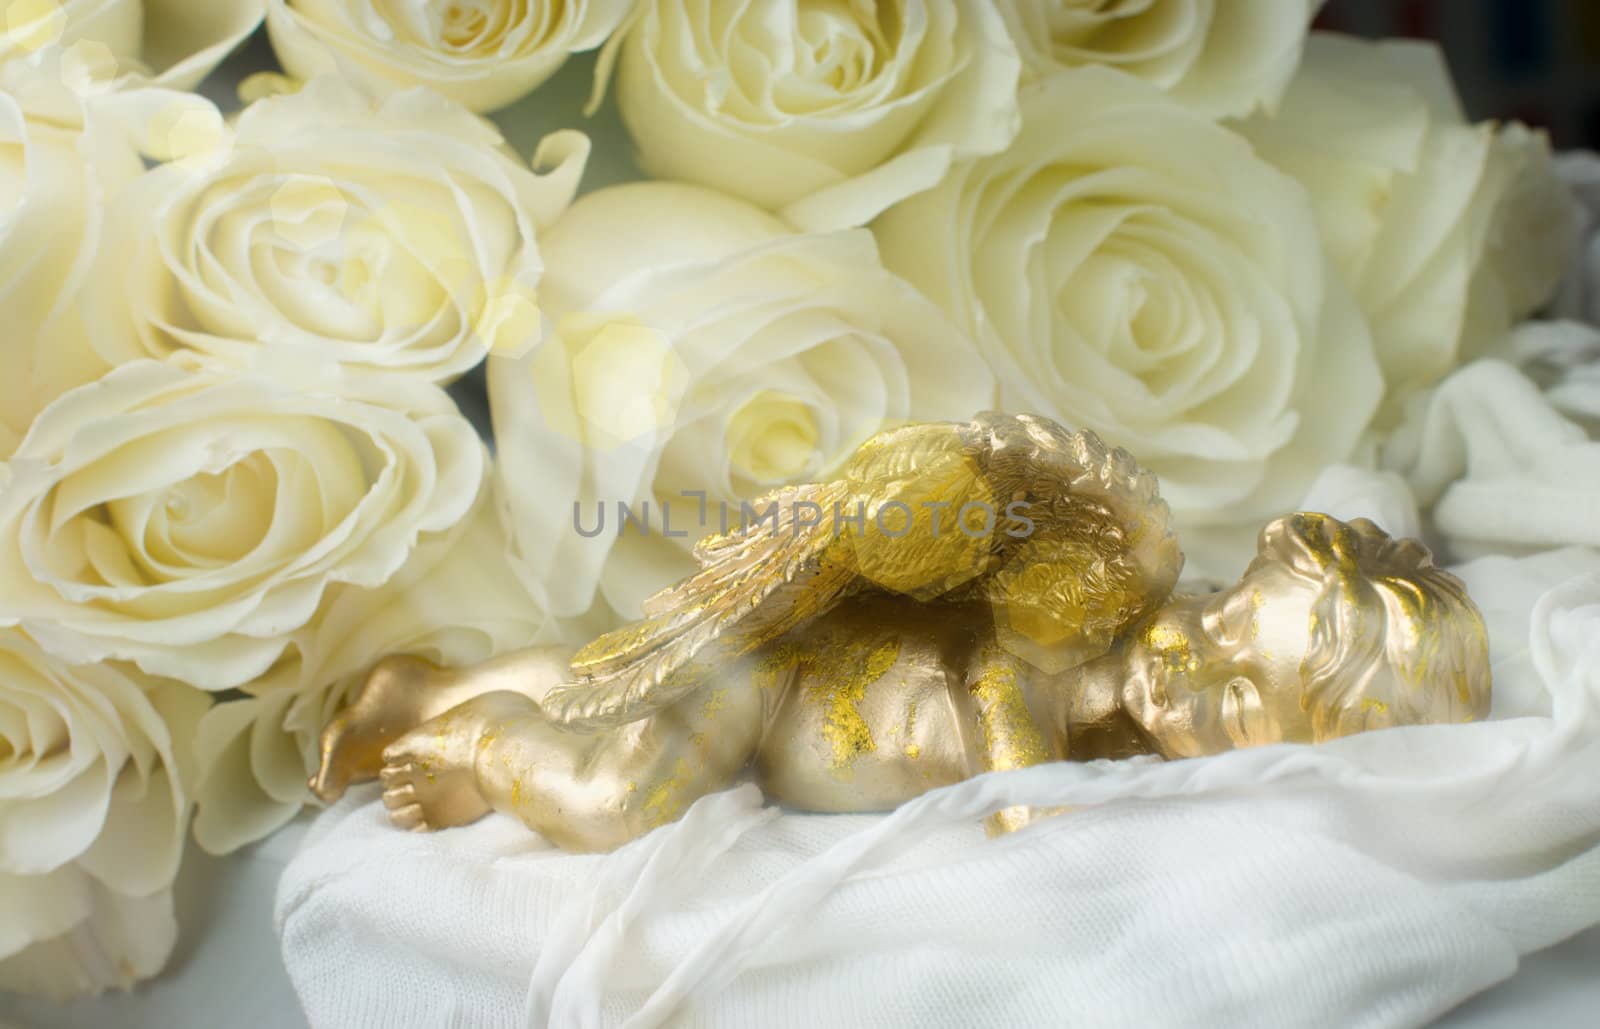 Sleeping angel on a background of white roses